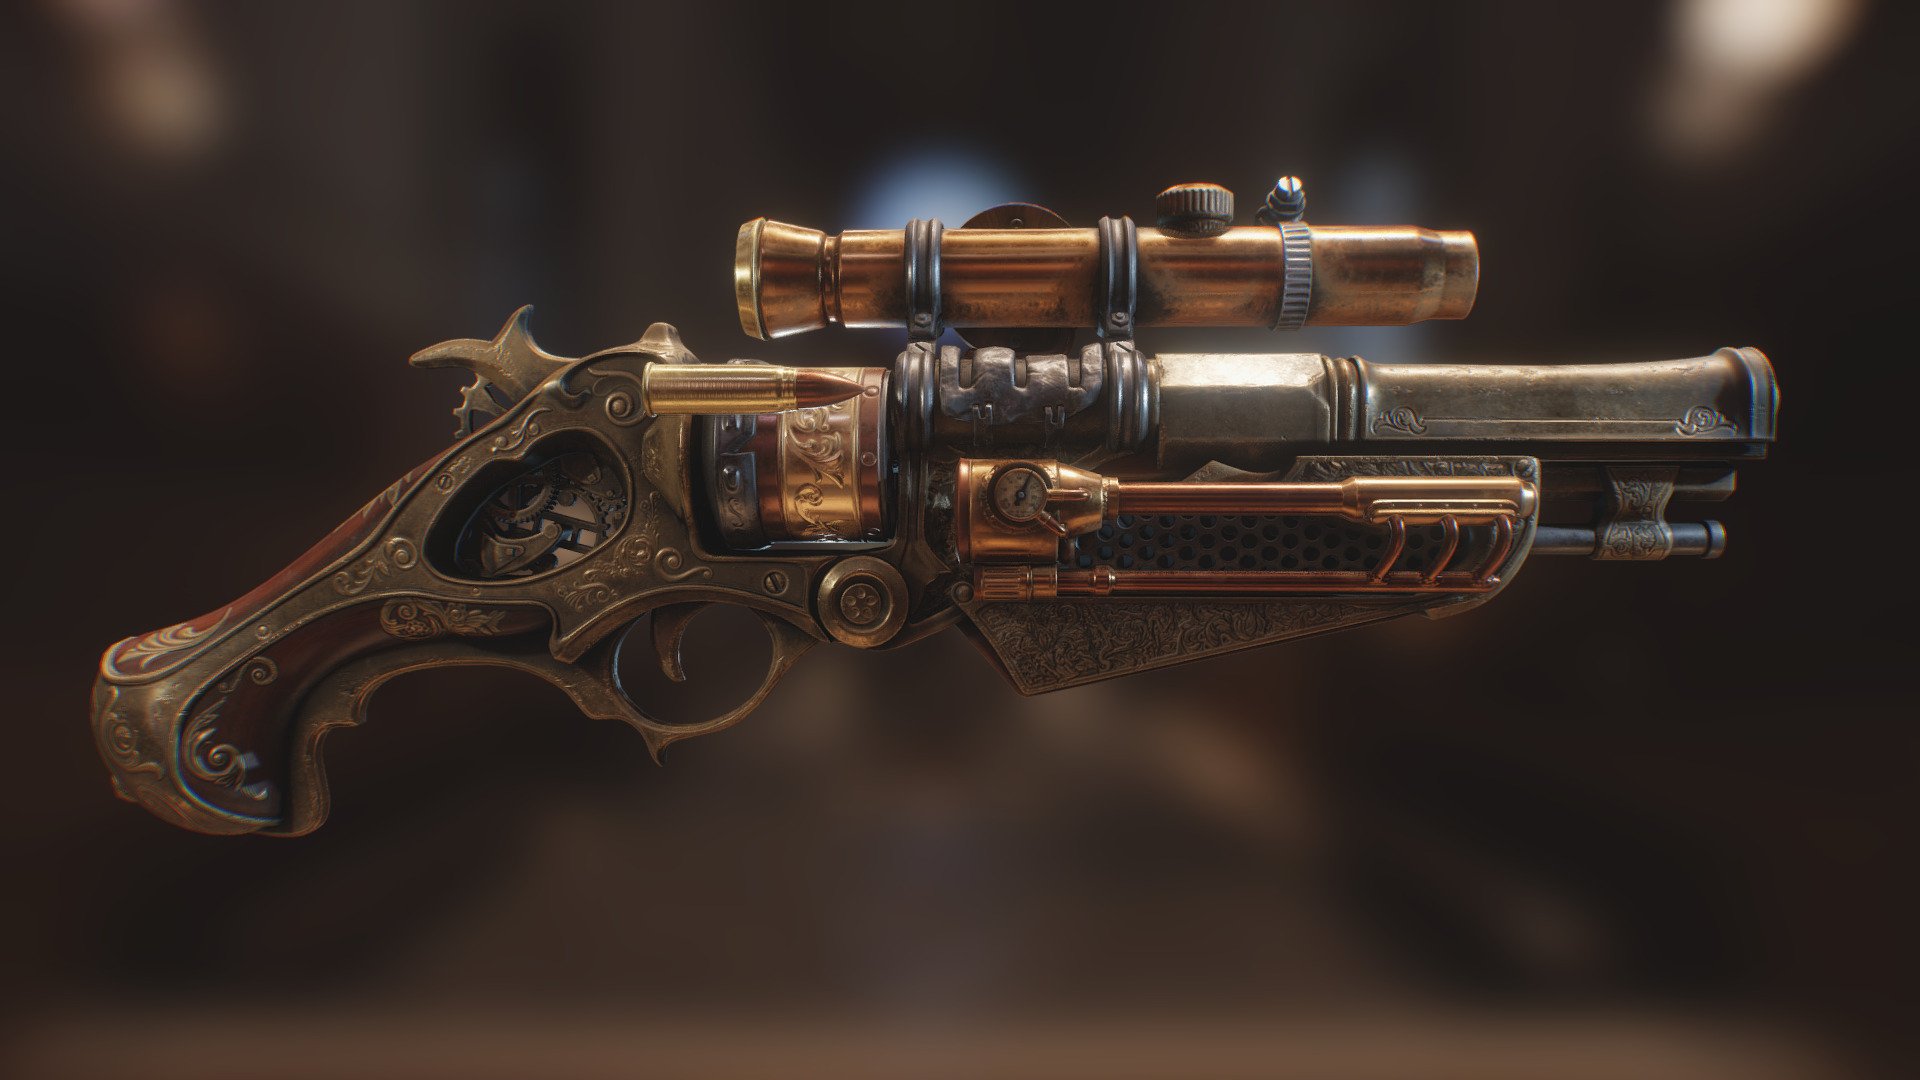 Former Royal Guard's Weapon, the Queen's Tender, modified with steampunk tech for constant field battle and raids.

Result of my Steampunk Gun Course at Victory 3D : https://victory3d.com/p/steampunkgun-game-asset
Highpoly and lowpoly with Blender, Engraves by Zbrush and textures with Substance Painter.

More Renders 
Artstation : https://www.artstation.com/artwork/8lJ6PE

If you want the project files ( .blend, zbrush sculpt, SP ), you can get it here https://www.artstation.com/marketplace/p/pqoR/steampunk-gun-queen-s-tender - Queen's Tender - Steampunk Gun - Buy Royalty Free 3D model by zeroswat 3d model